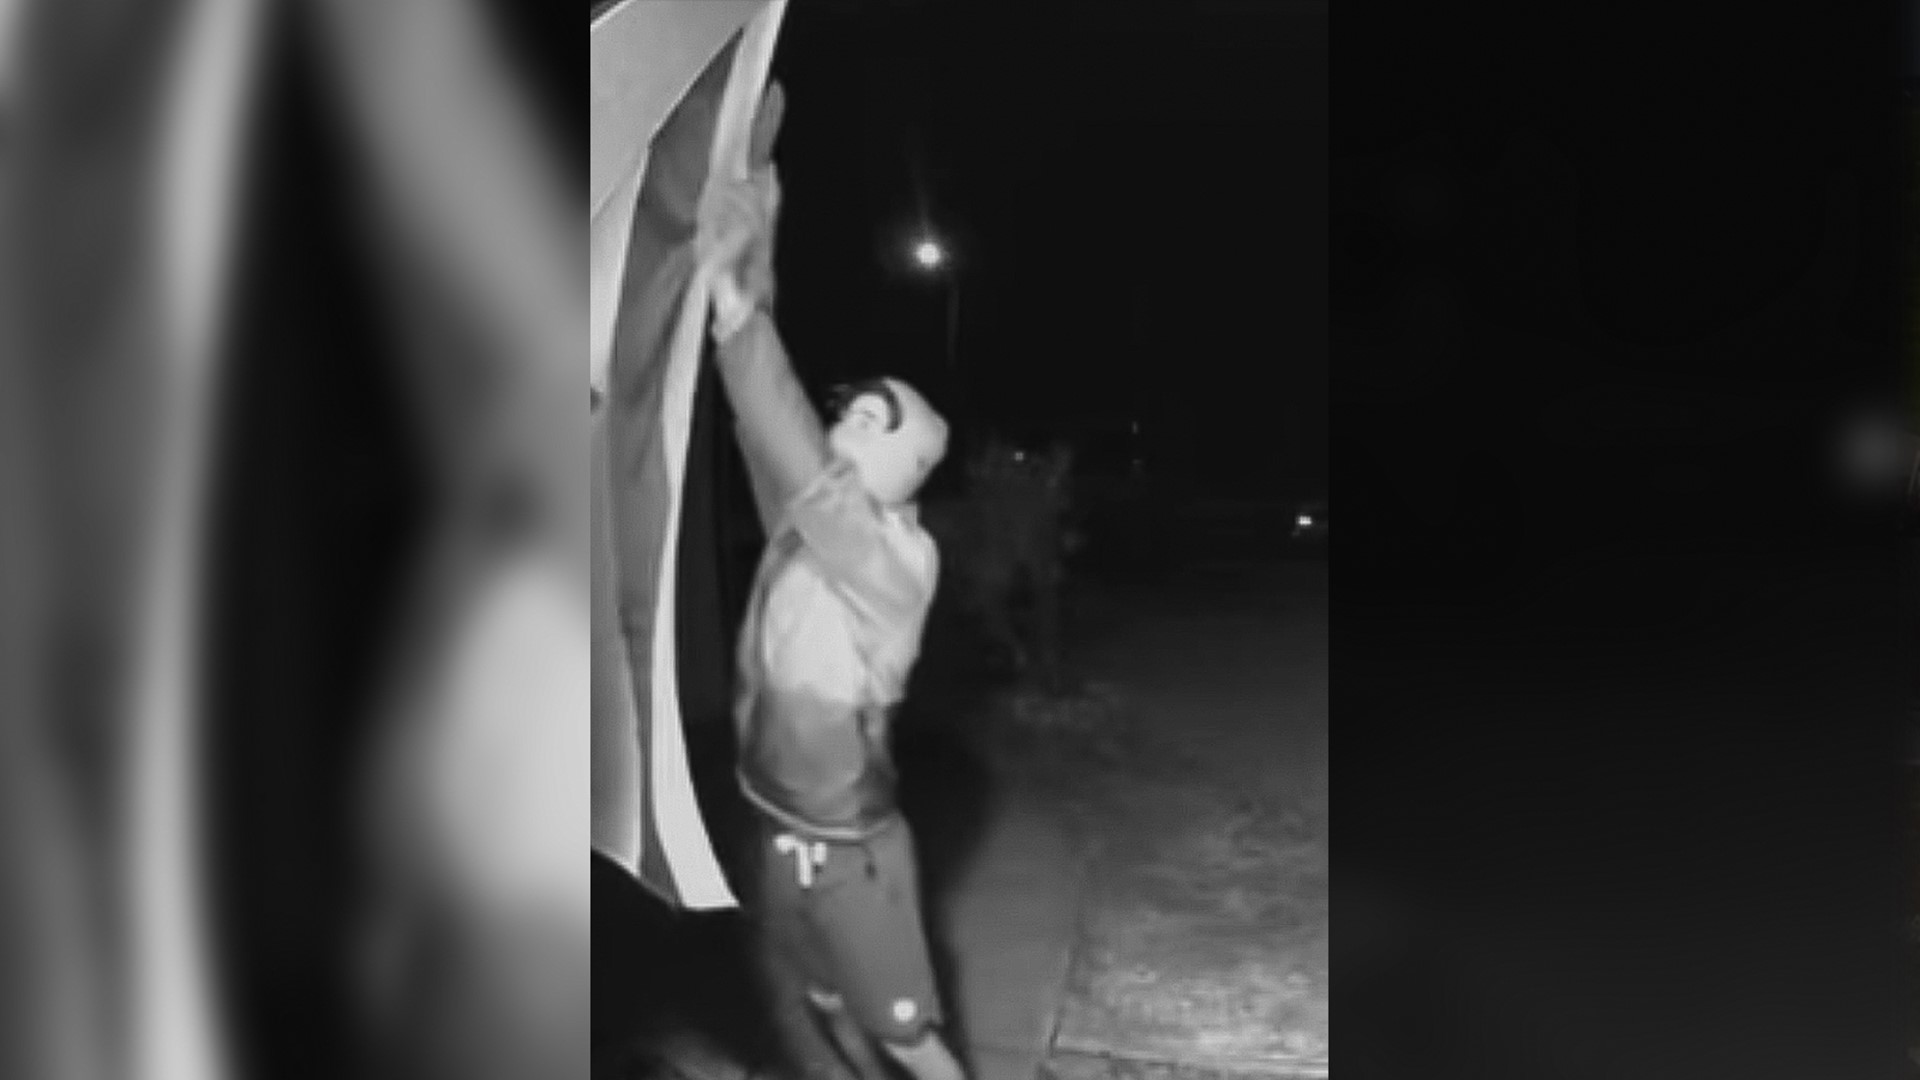 Davis police are investigating a suspected hate crime on Israeli flag at residence